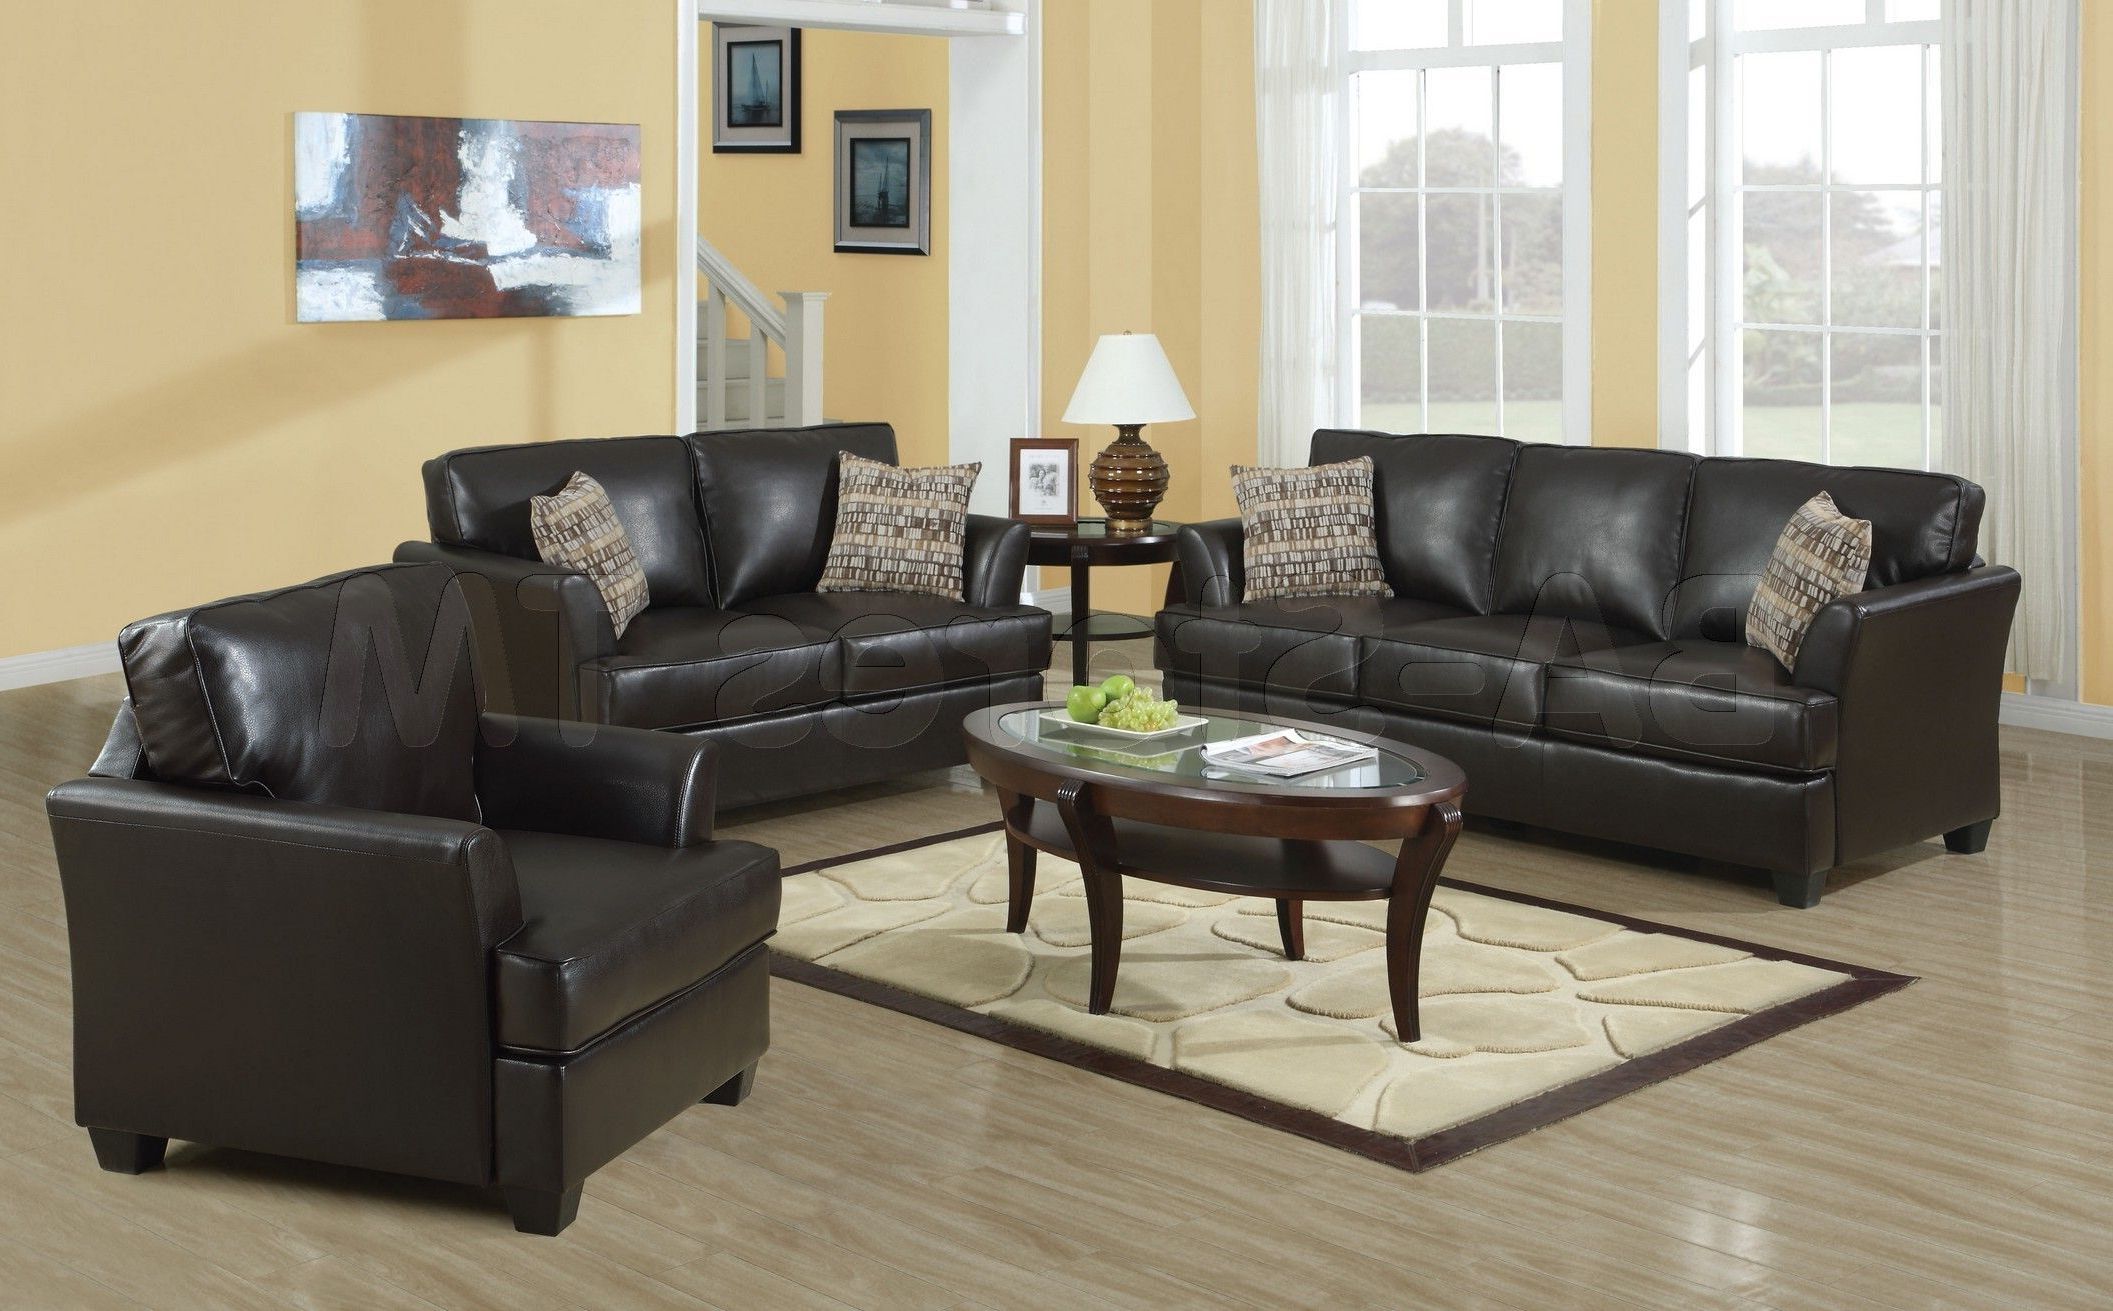 3Pc Bonded Leather Upholstered Wooden Sectional Sofas Brown Intended For Most Up To Date Chocolate Brown Bonded Leather 897 Collection 3 Pc Sofa (View 23 of 25)